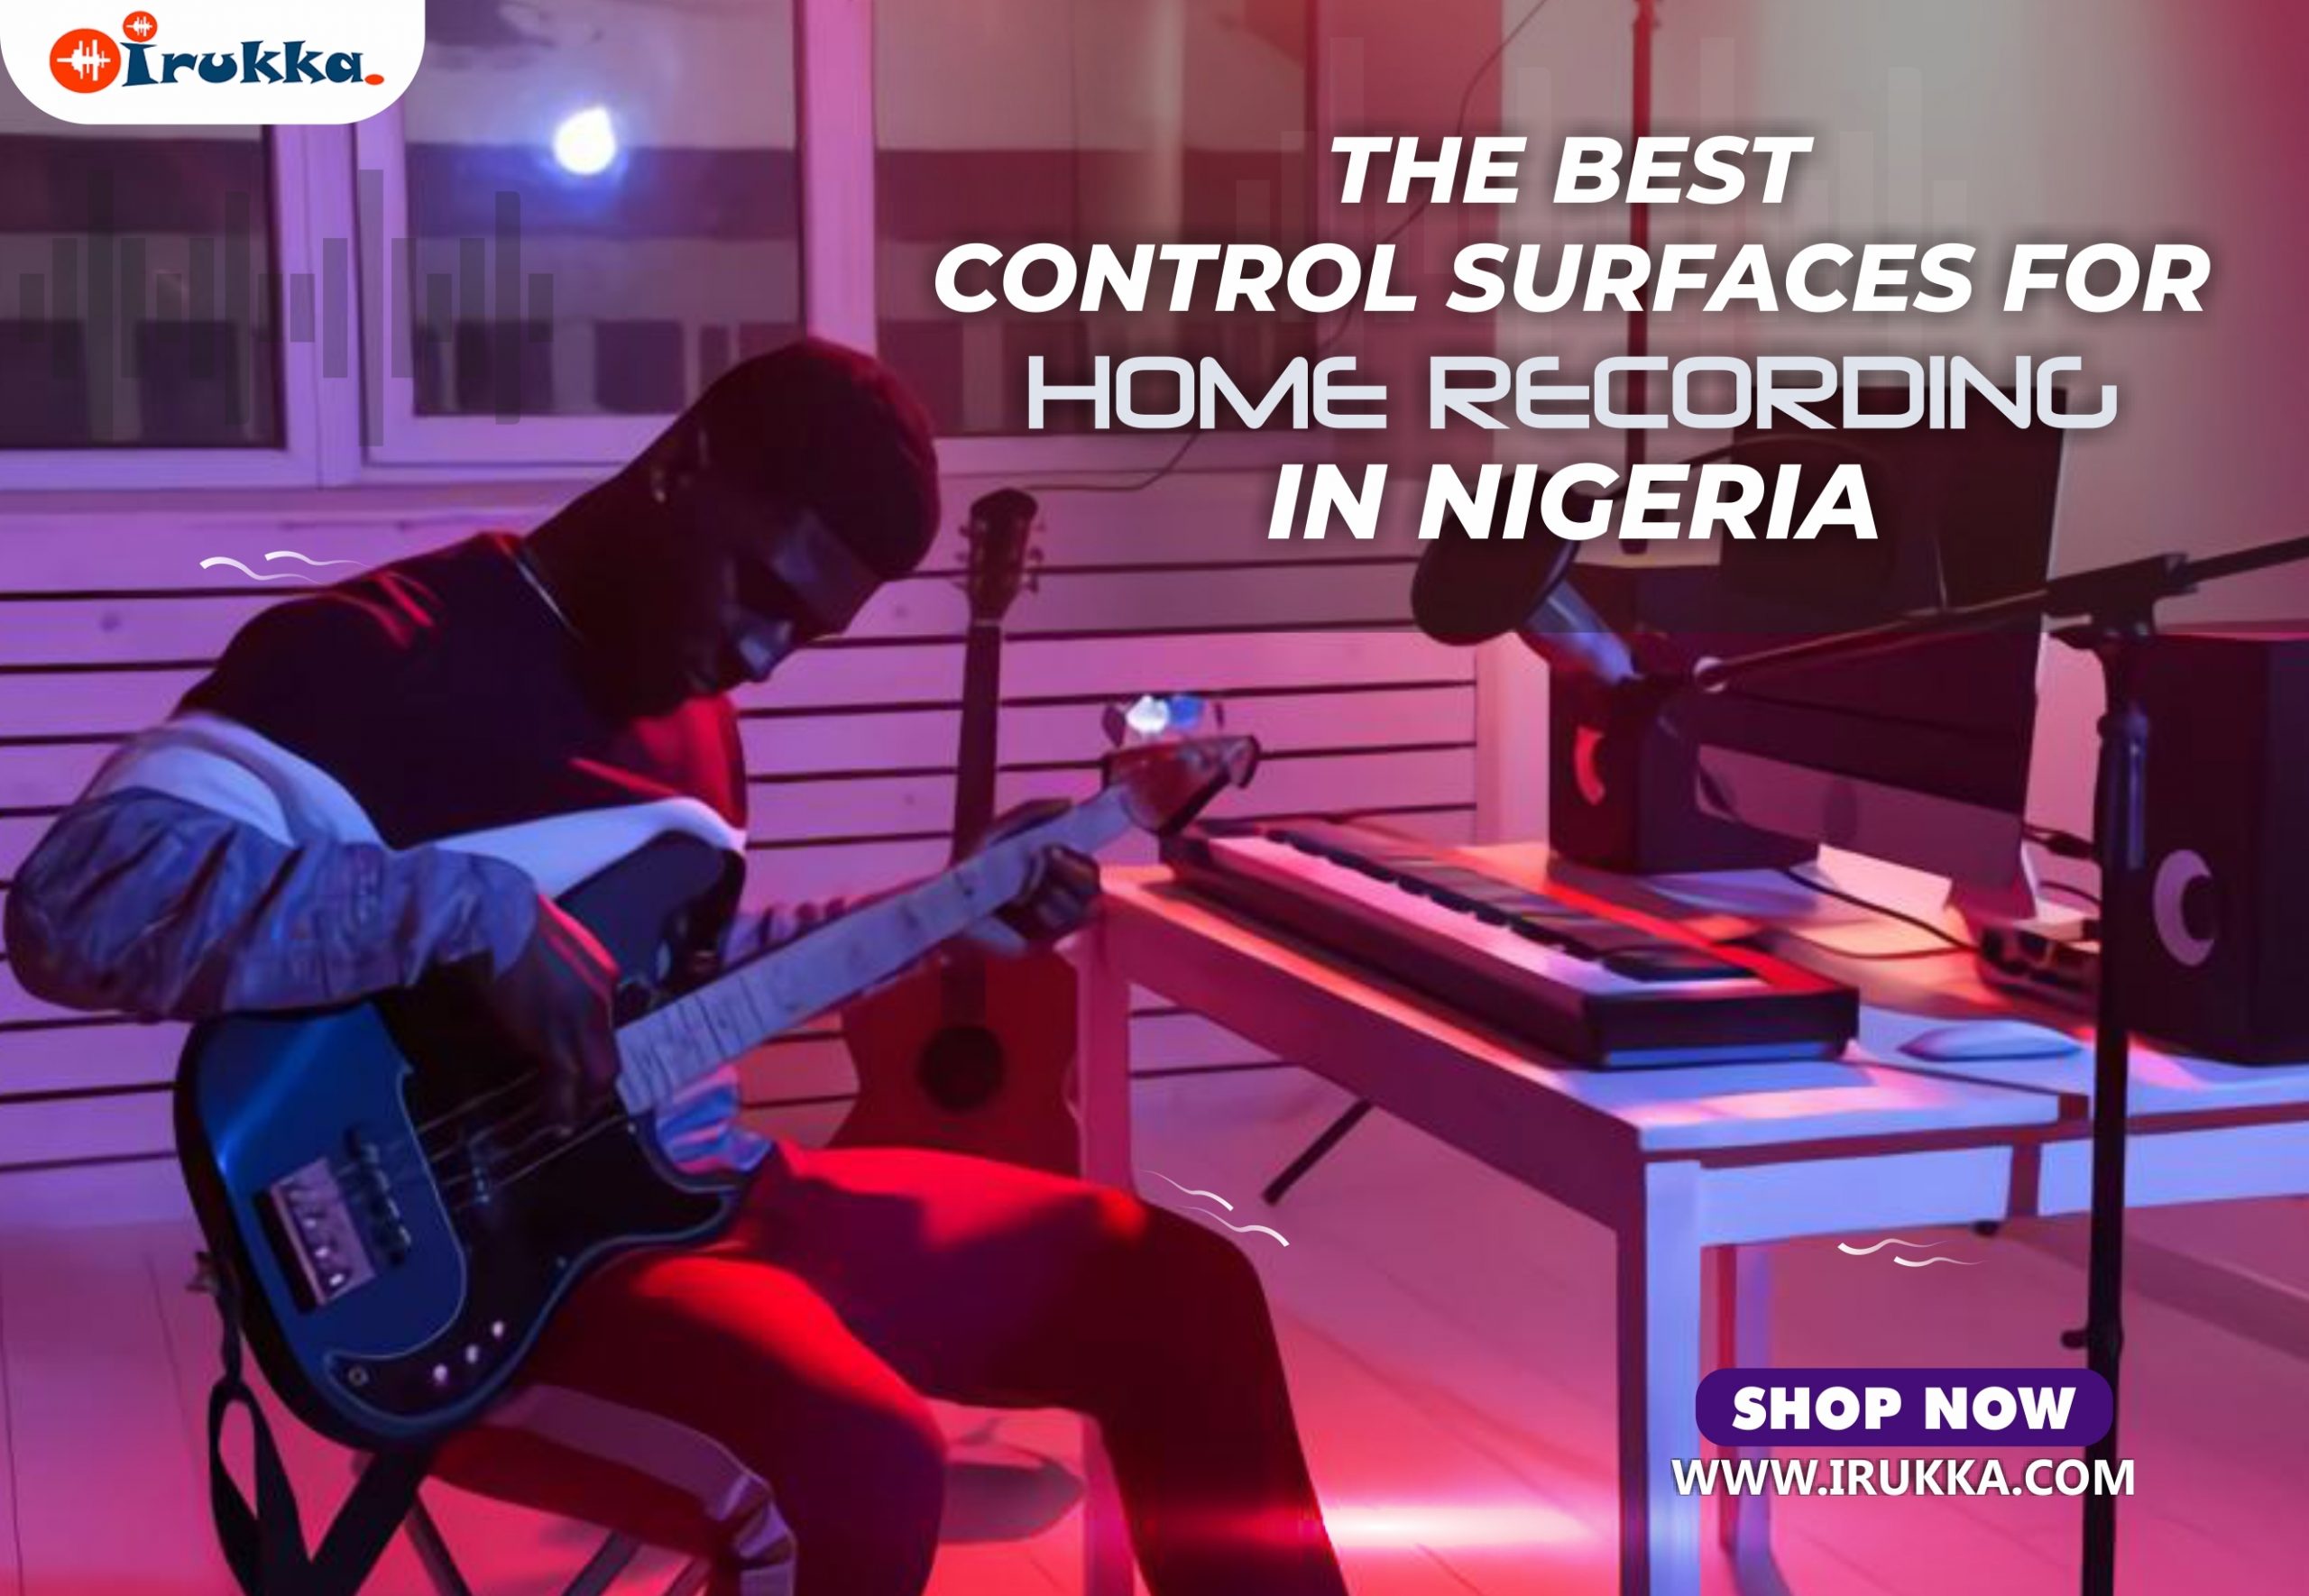 The Best Control Surfaces for Home Recording in Nigeria